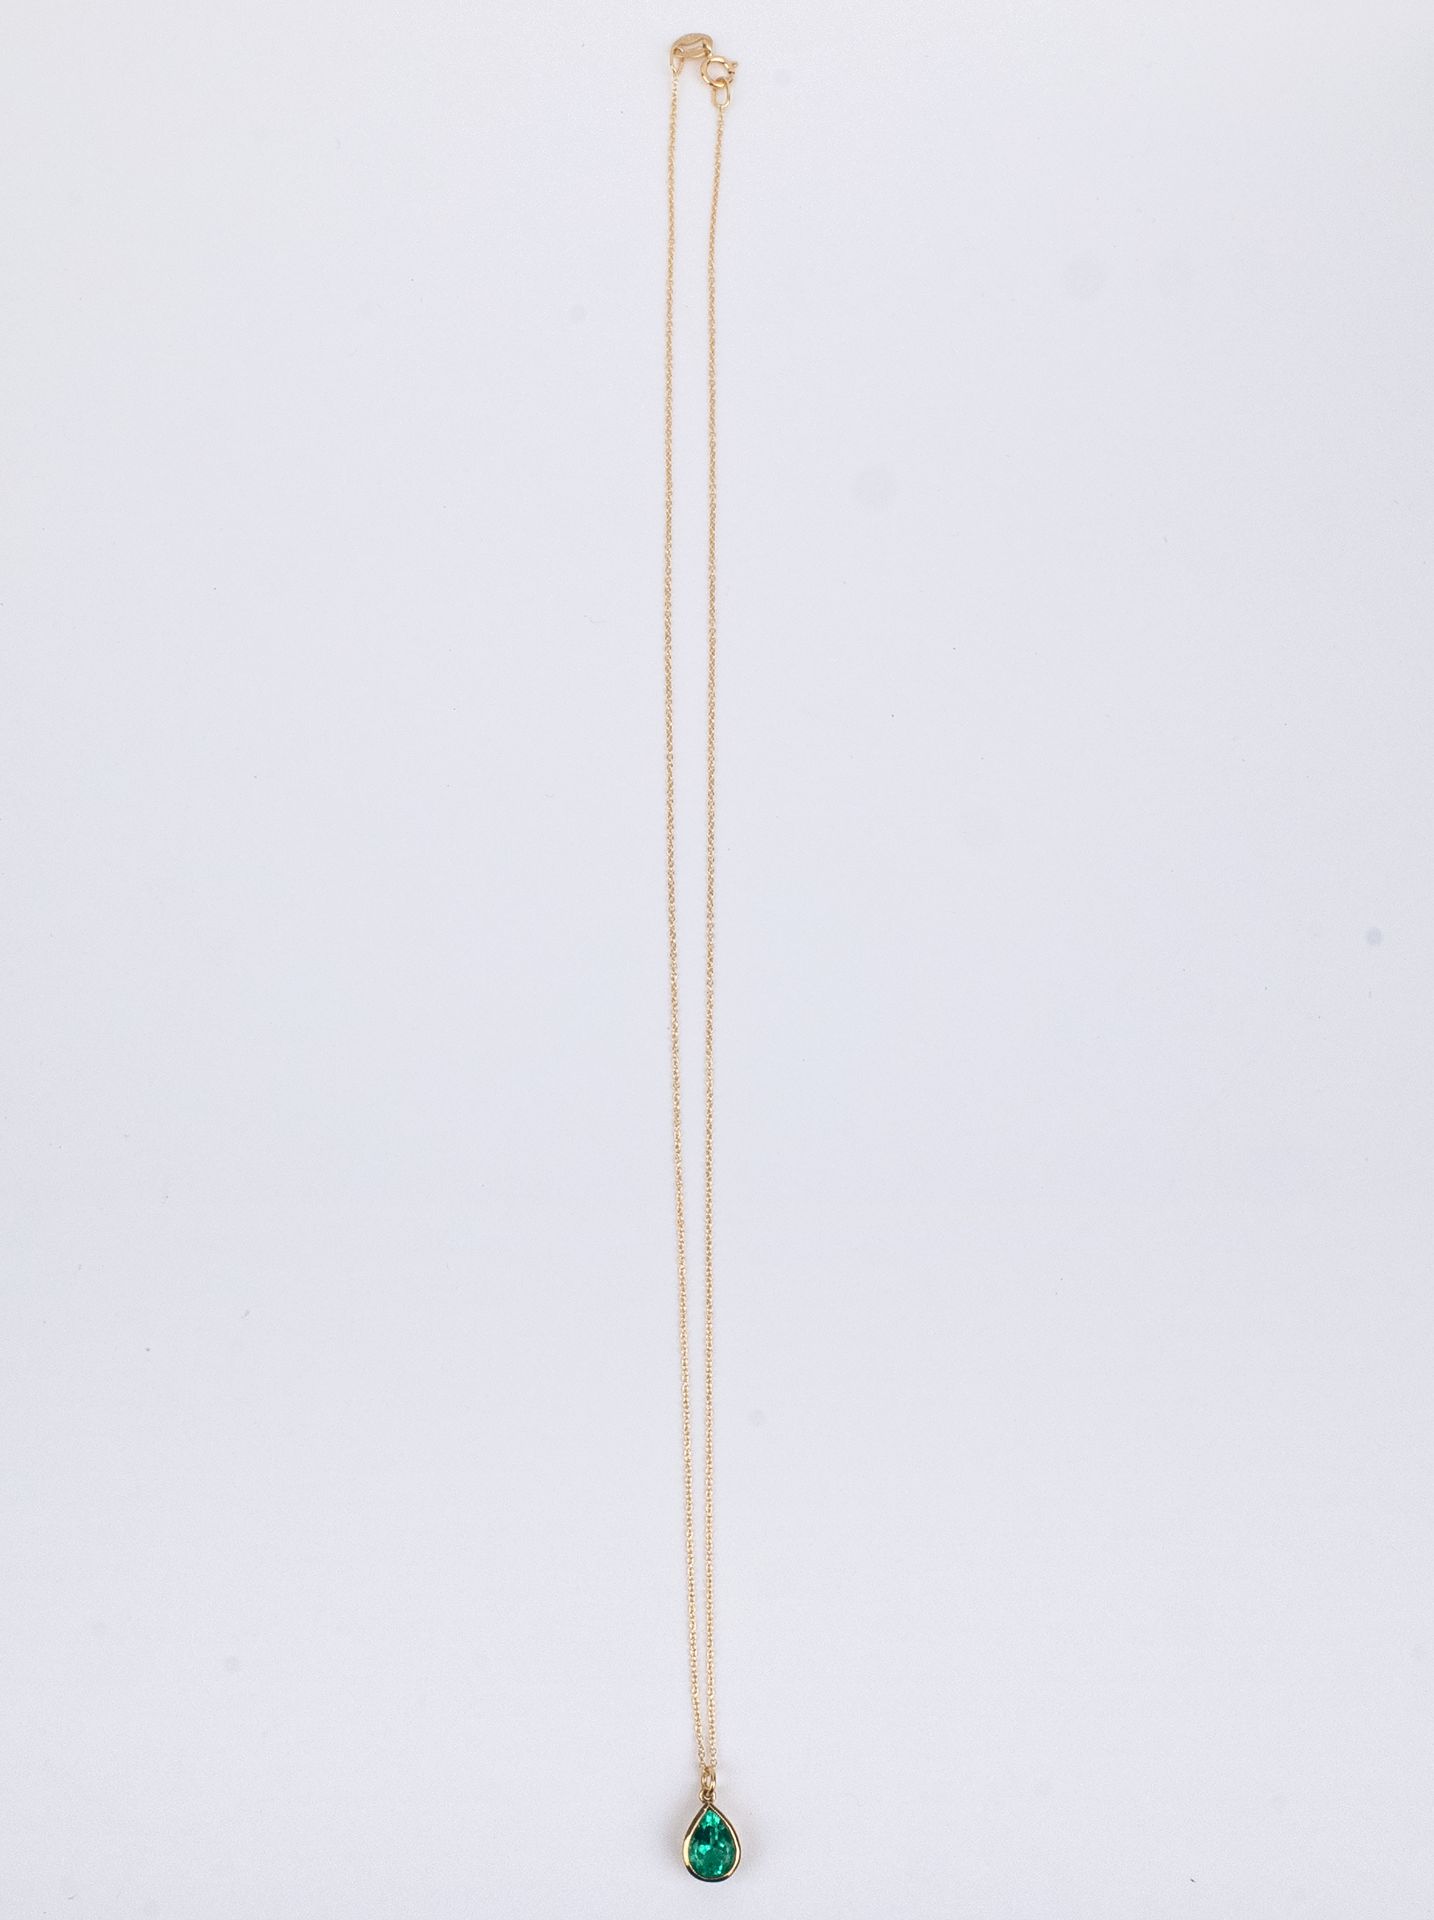 An 18k. yellow gold and emerald pendant and chain